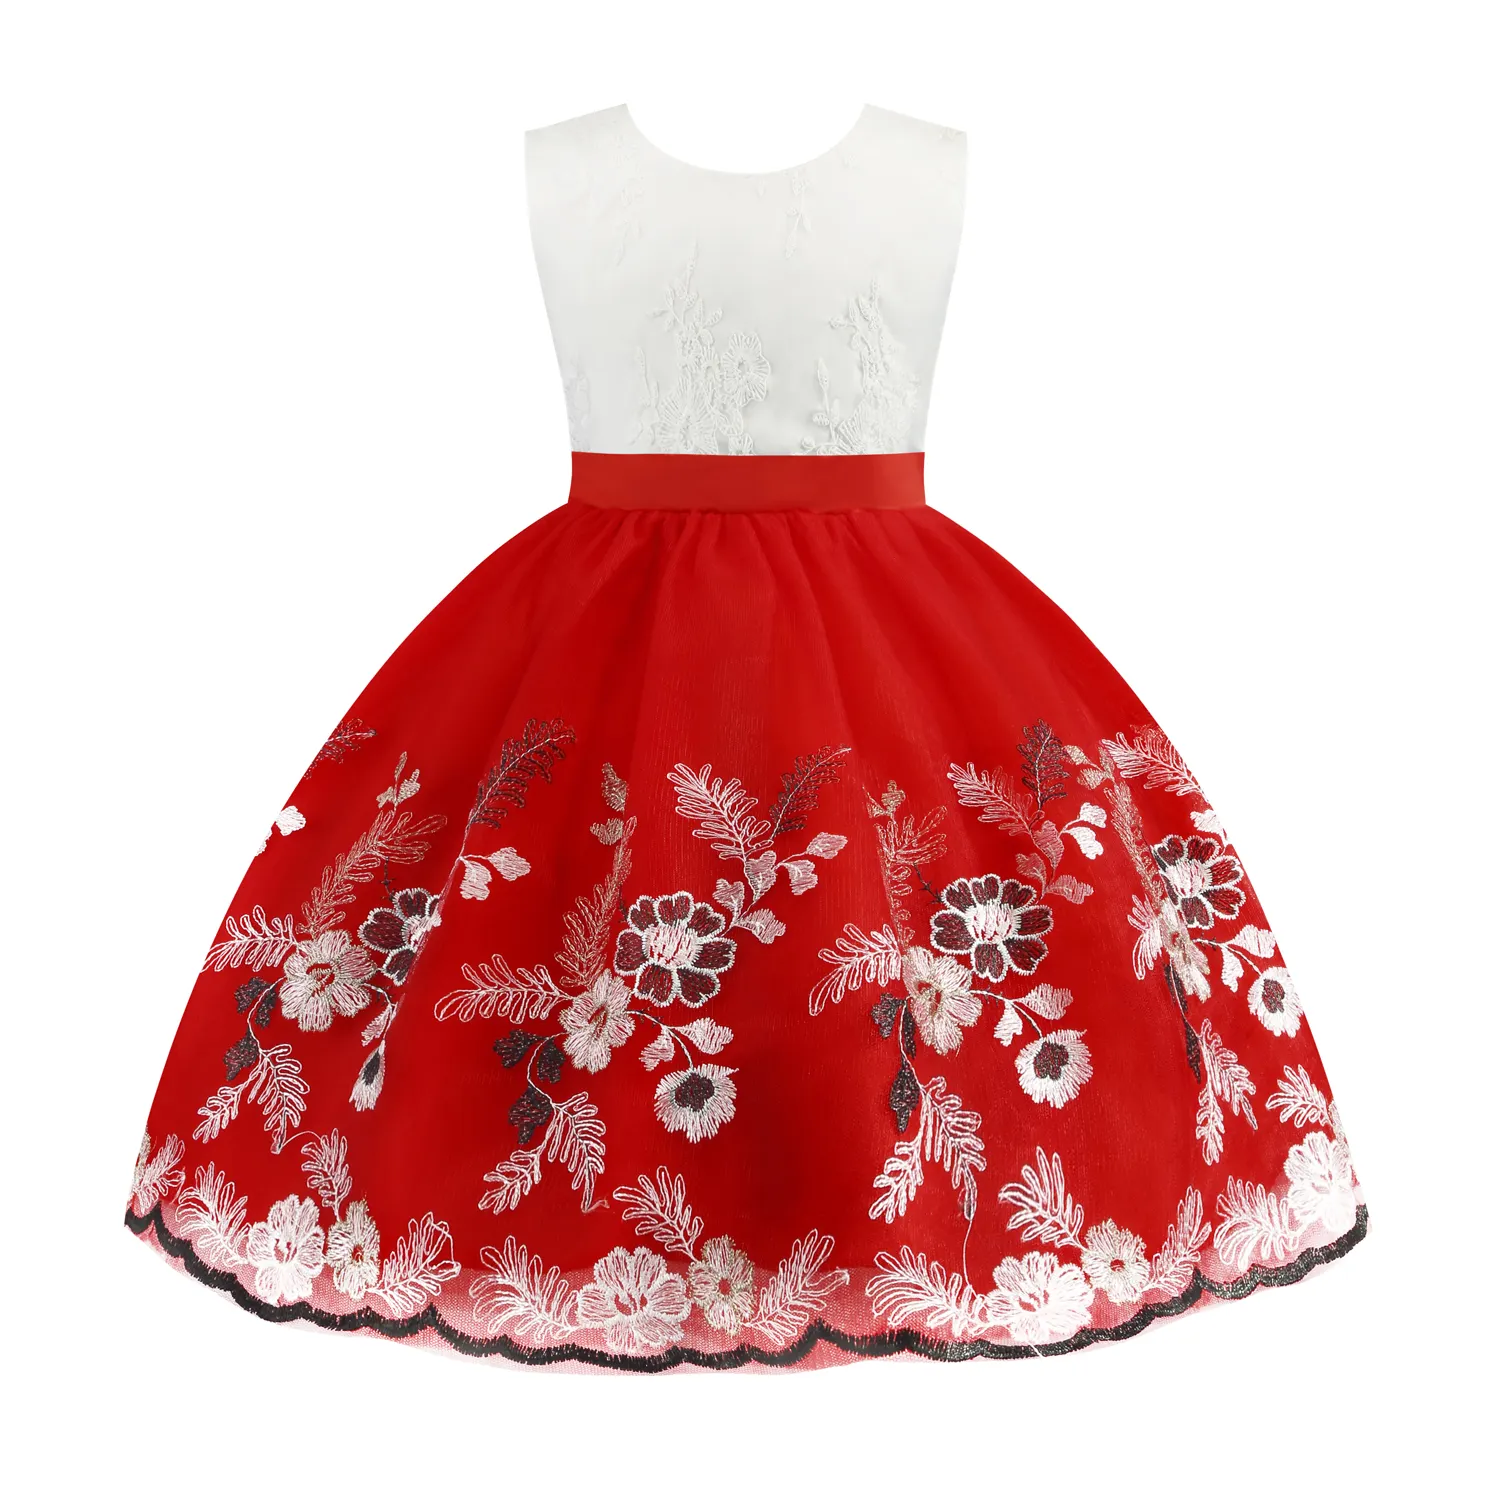 2021 new pattern Sequin bow dresses children Christmas performance birthday party dress 0 to 9 year old